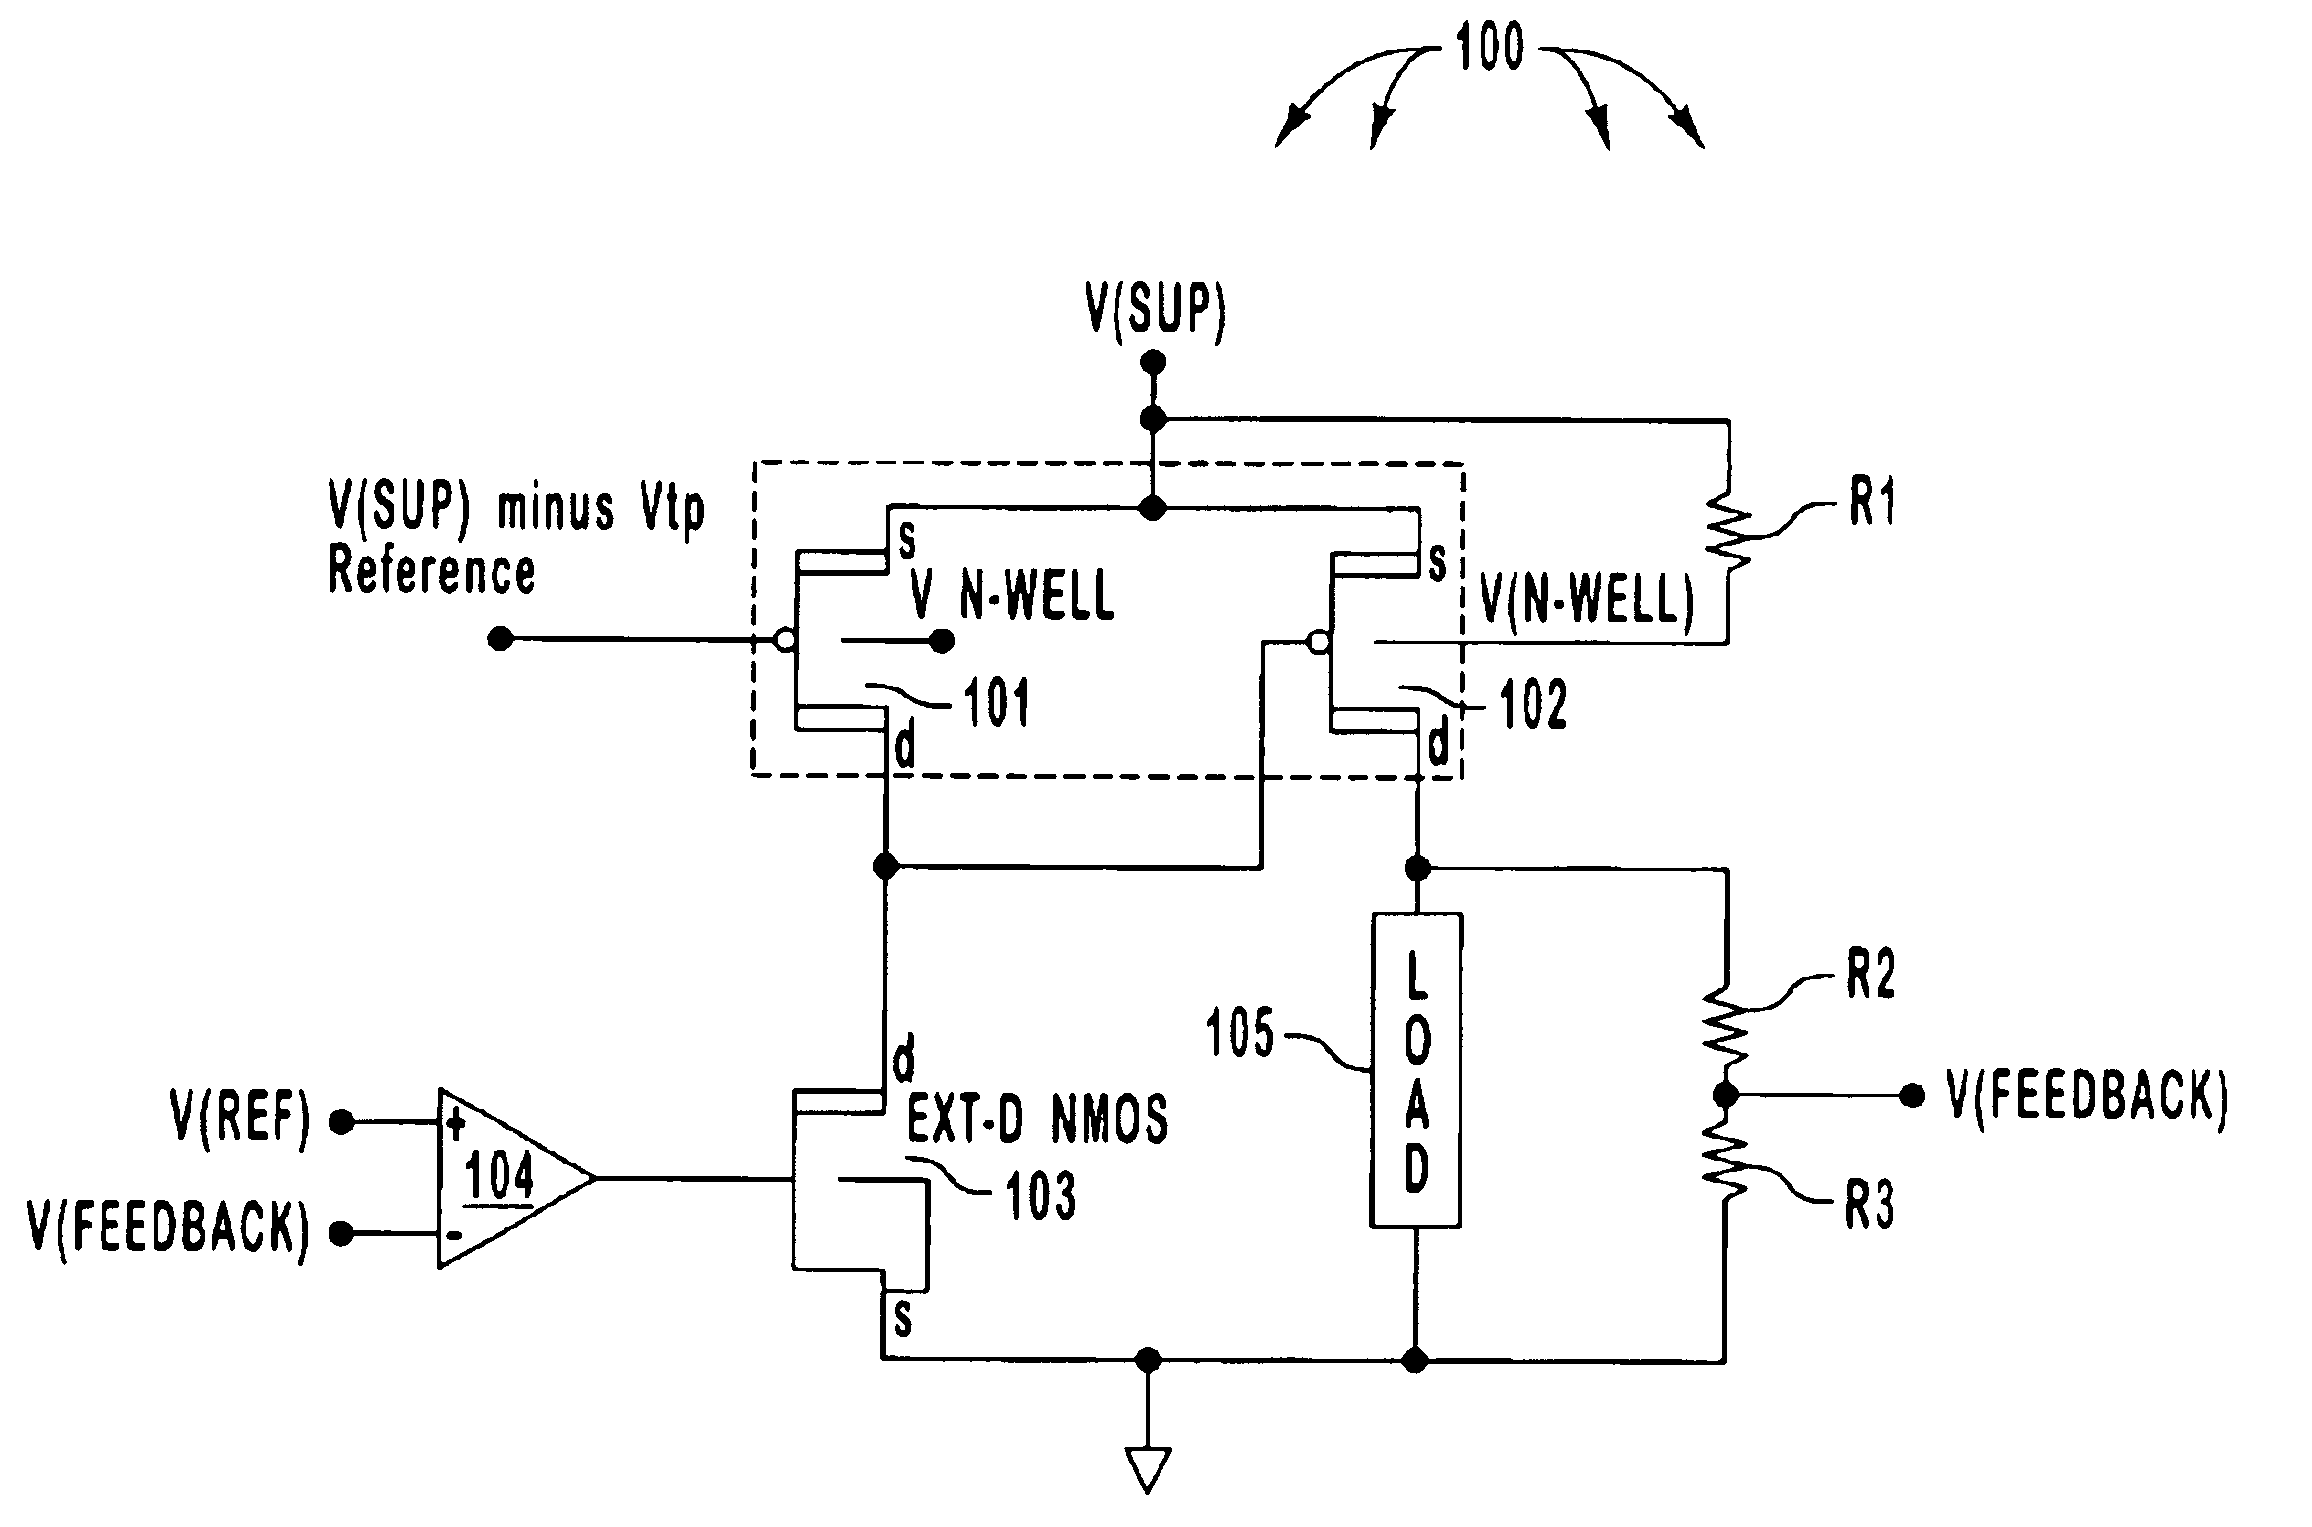 Double-sided extended drain field effect transistor, and integrated overvoltage and reverse voltage protection circuit that uses the same